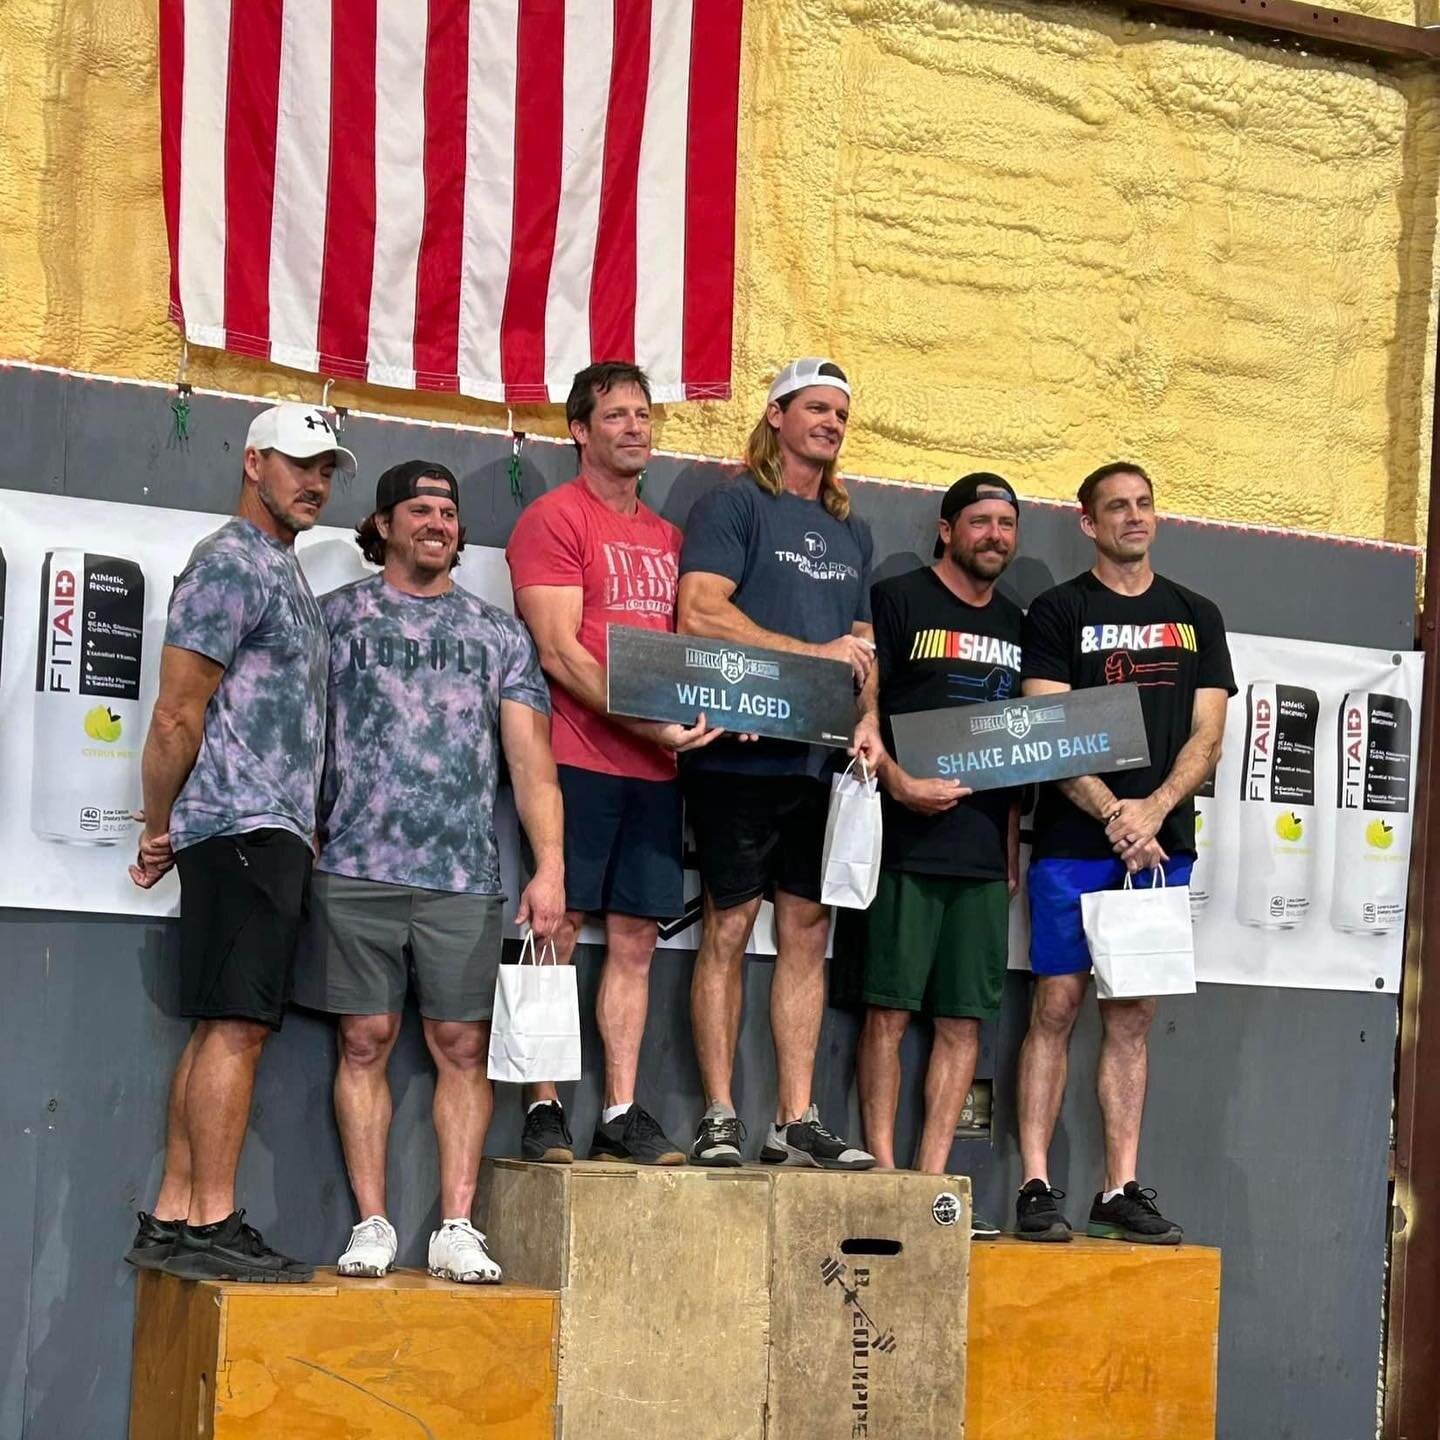 CrossFit Aero represented well yesterday at @officialbarbellbeatdown hosted by @trainhardercrossfit. 

@shenandoahhomesupplyco and @alex_hunter69 finished 5th in the 35-44 Male/Male division. 

@bkuss89 and @jliane4 finished 4th in the RX Male/Female